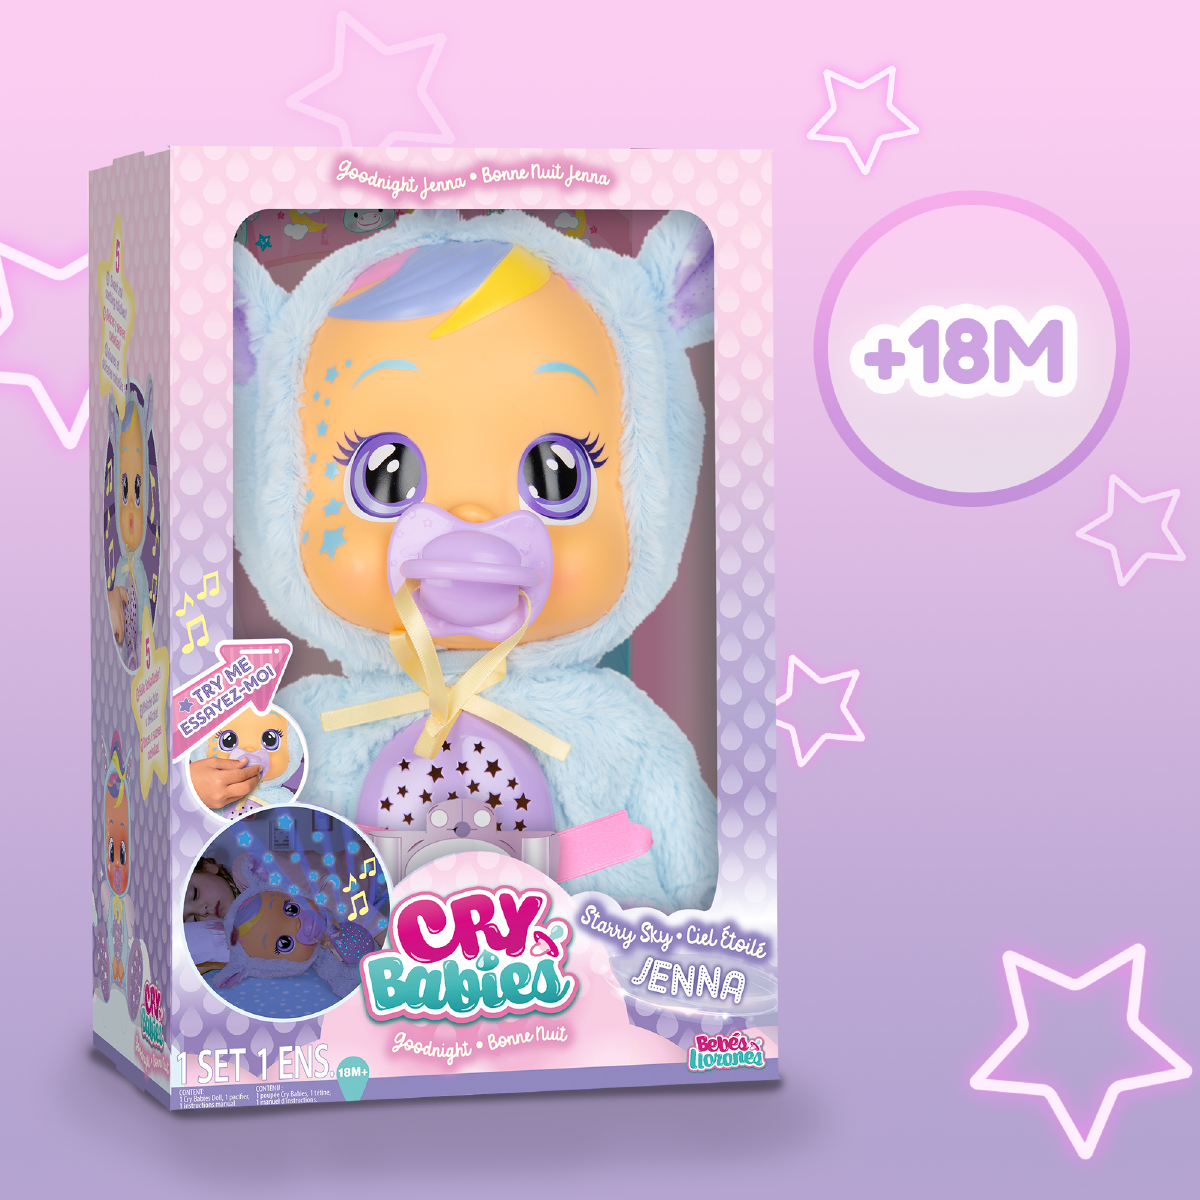 Cry Babies Goodnight Starry Sky Jenna 12 inch Doll with Starry Sky Projection! - image 7 of 10